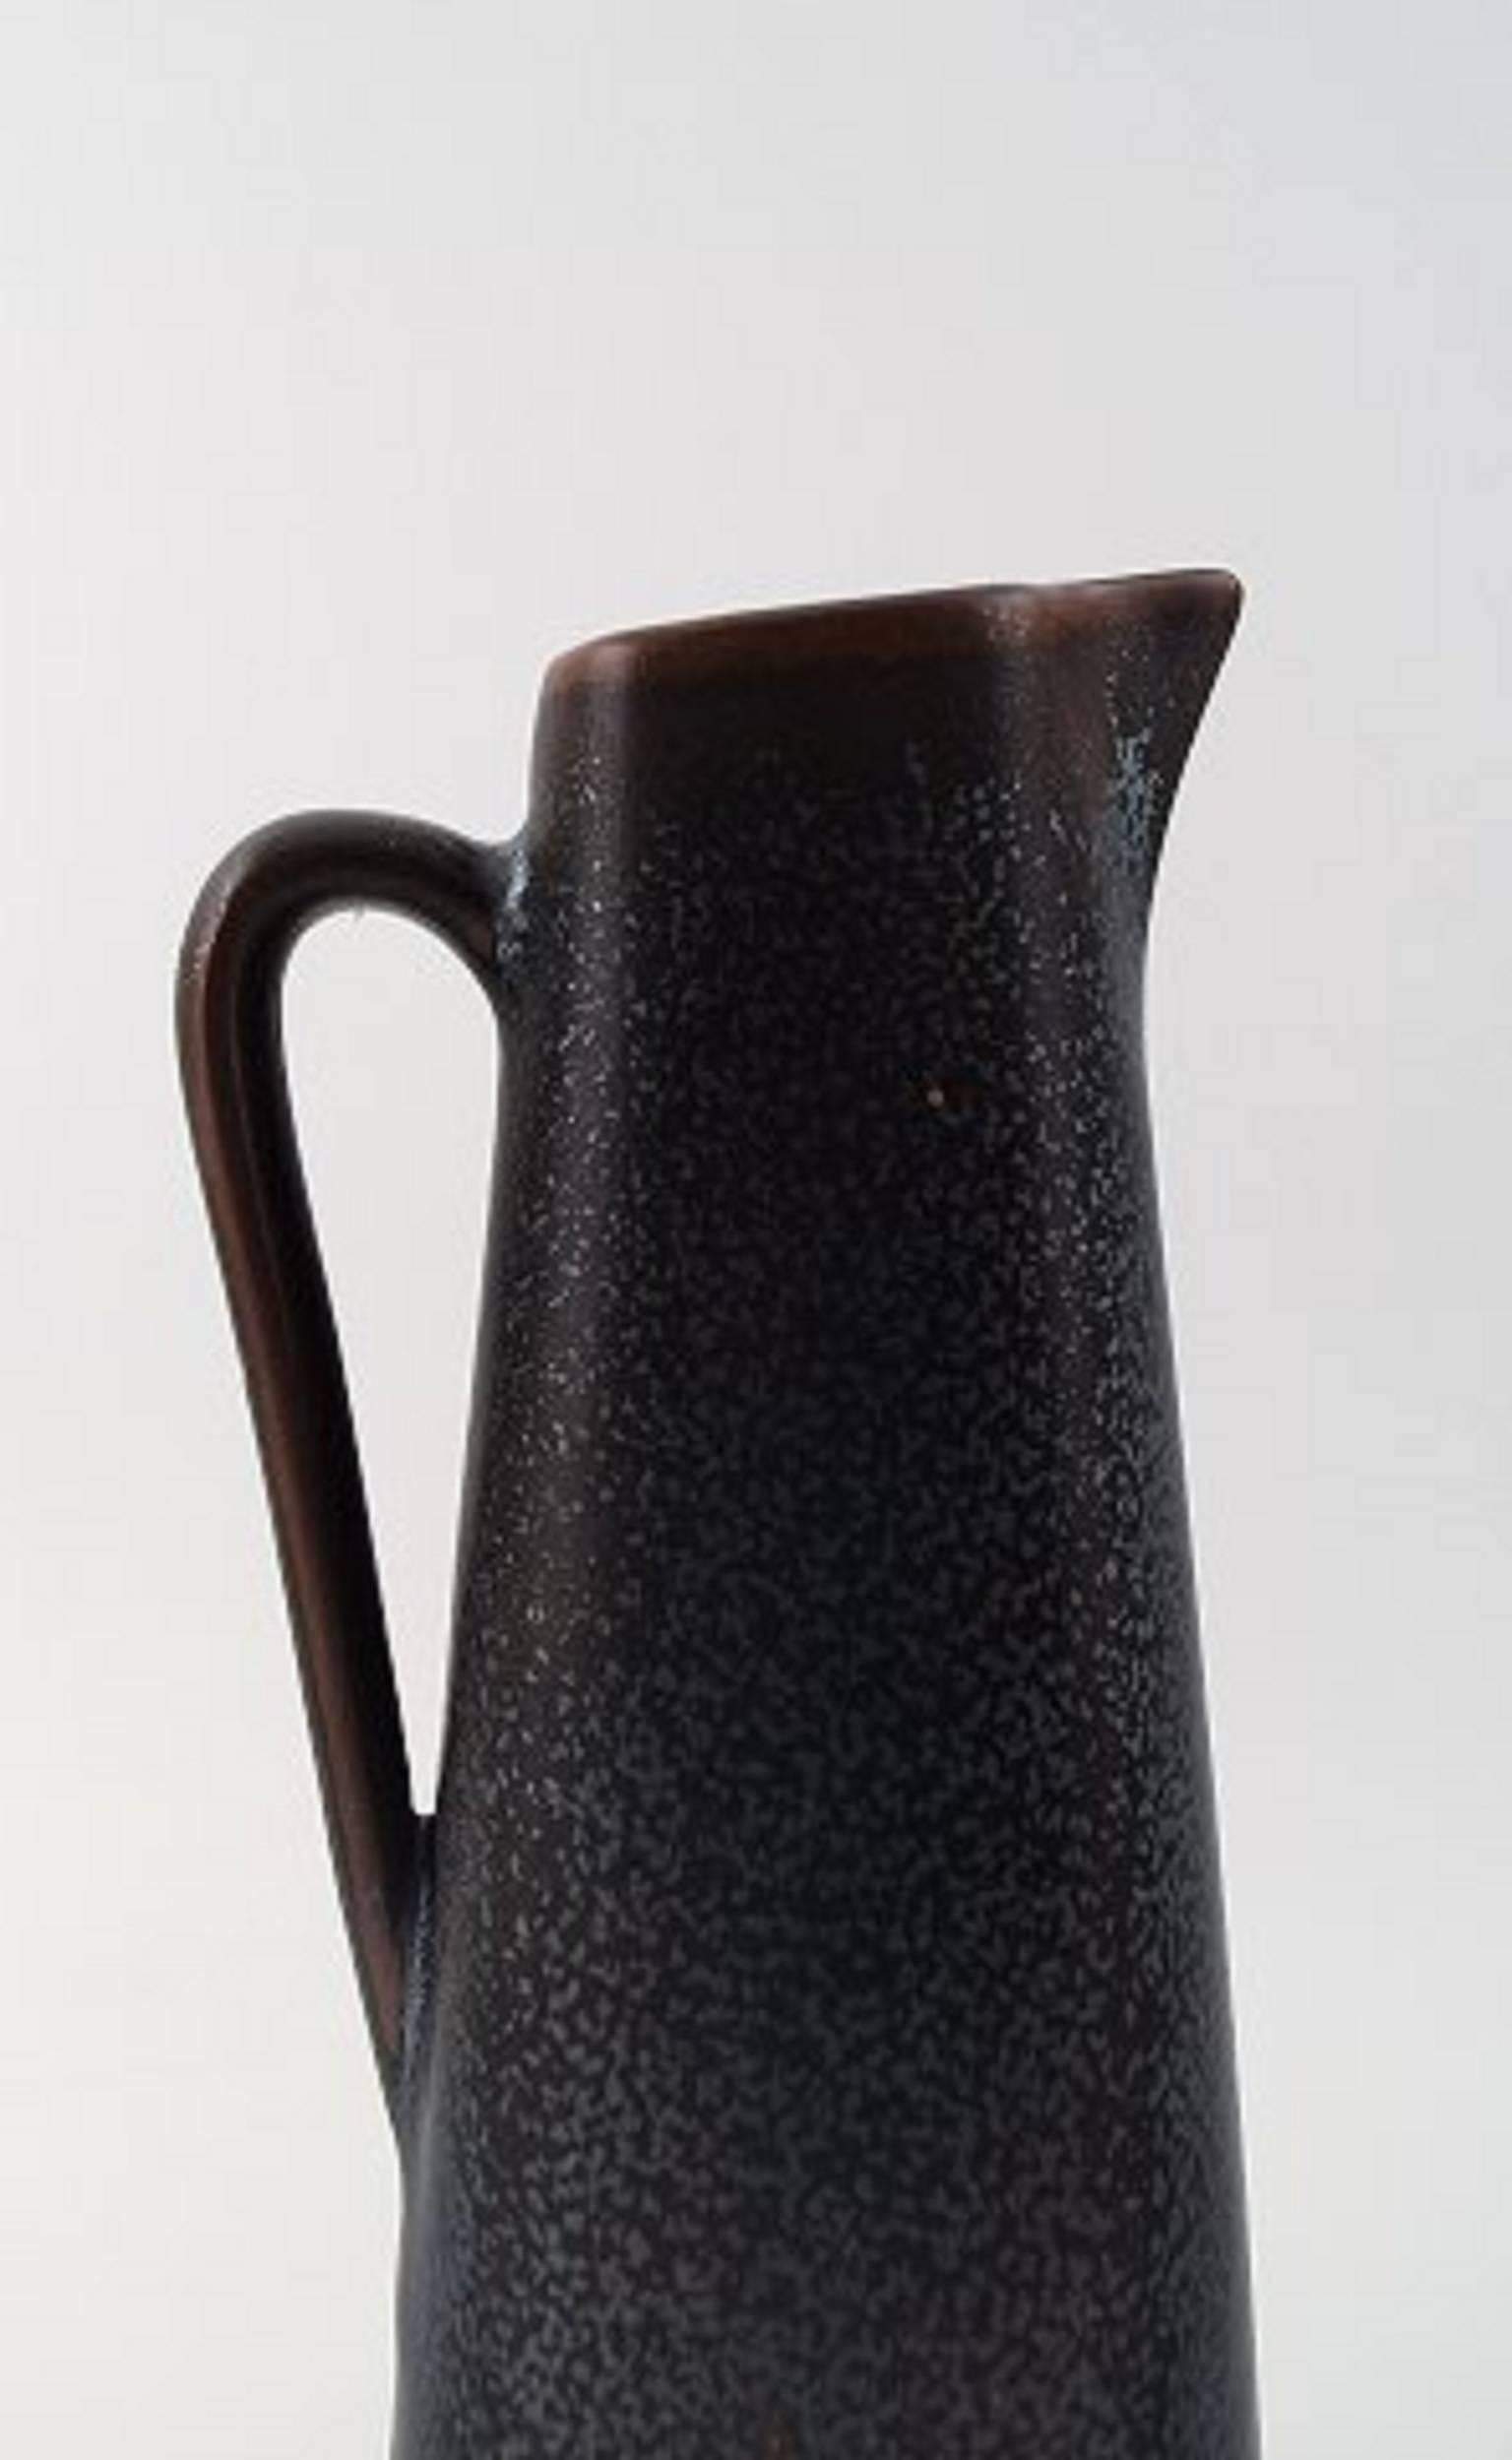 Gunnar Nylund, Rörstrand vase/pitcher in ceramics.
Beautiful glaze.
In perfect condition.
Measures: 26 cm height. Marked.